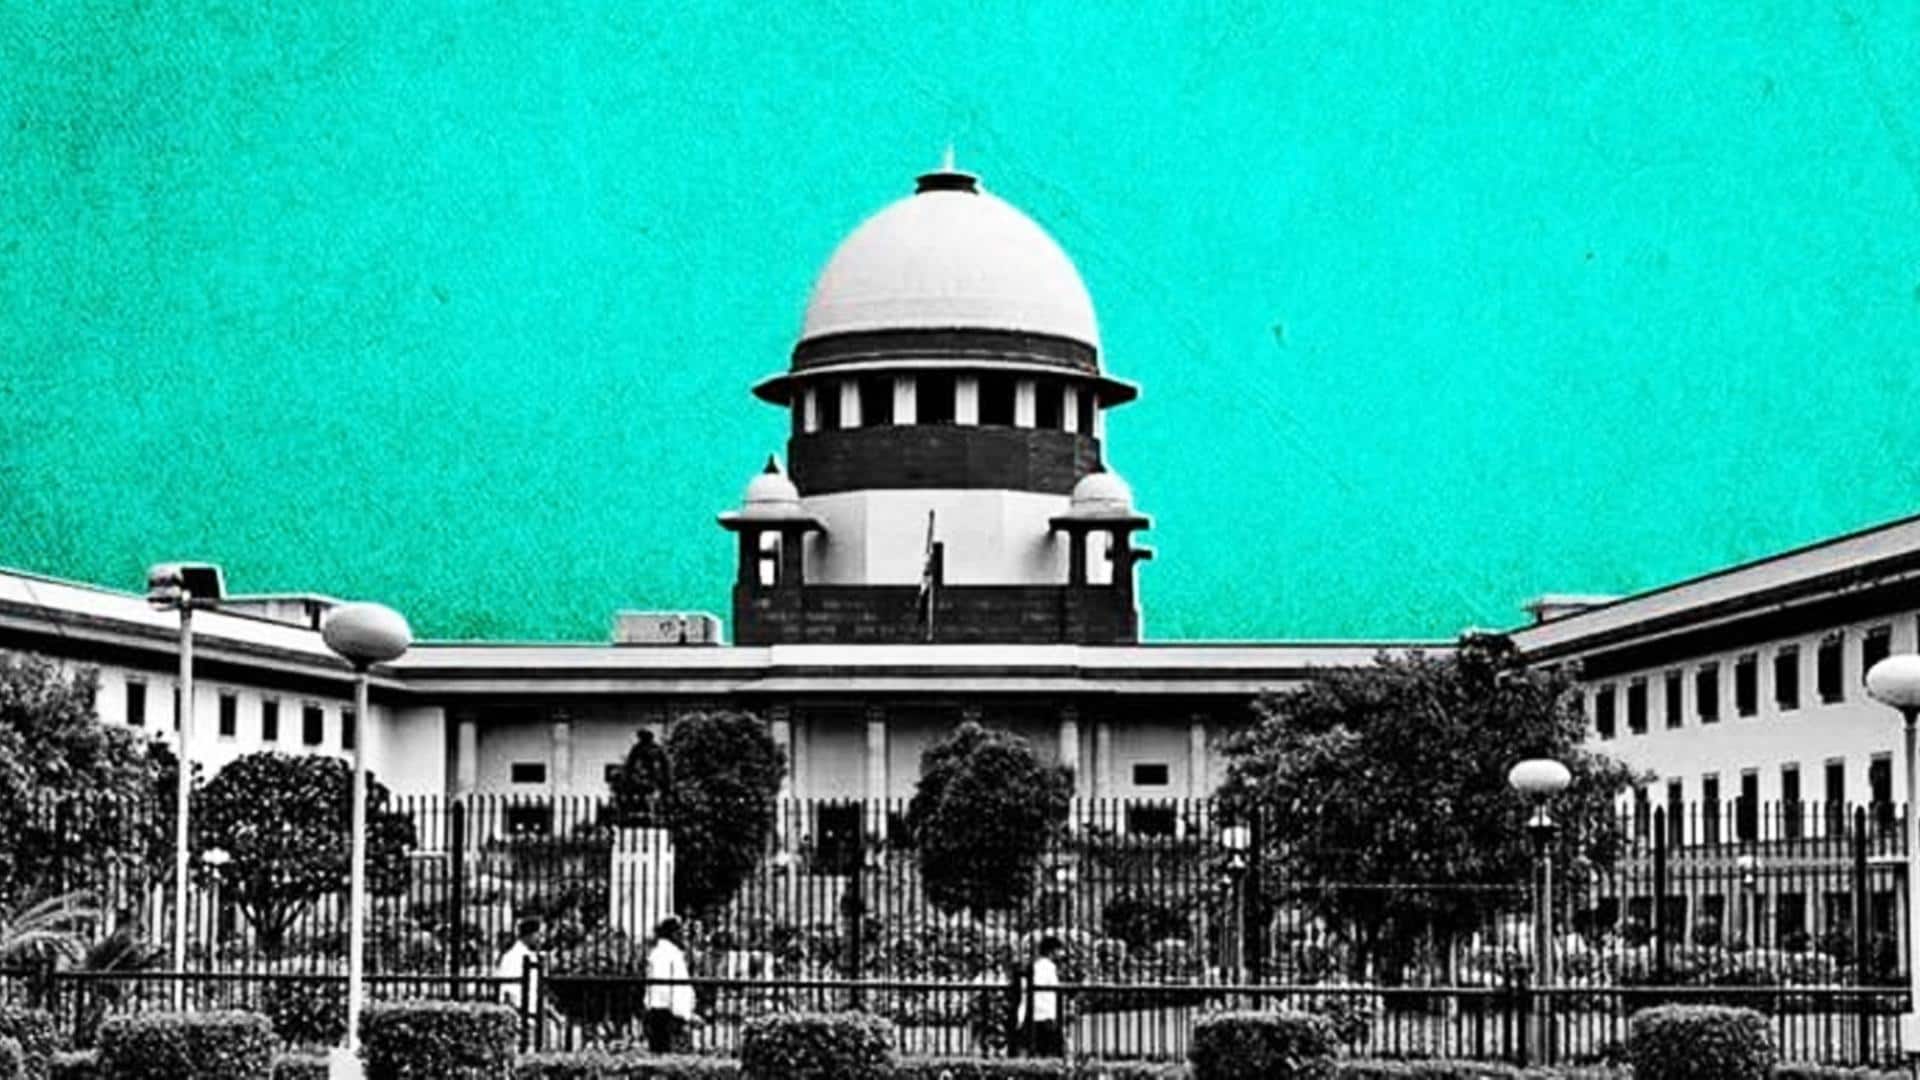 Don't create fearful atmosphere: SC to ED over threatening claims